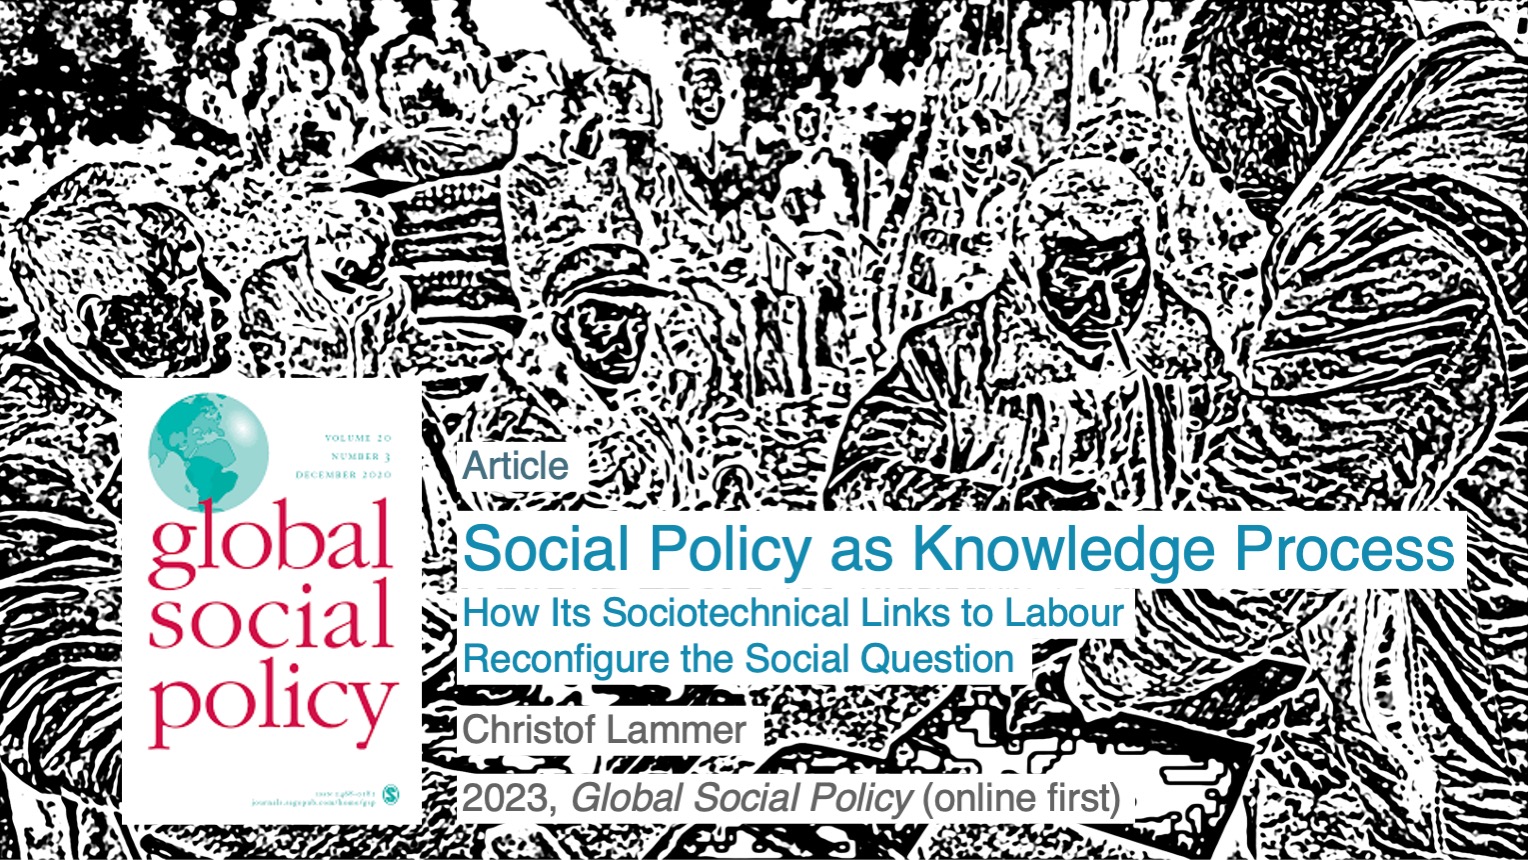 Christof Lammer: Social Policy as Knowledge Process. How Its Sociotechnical Links to Labour Reconfigure the Social Question. 2023, Global Social Policy.